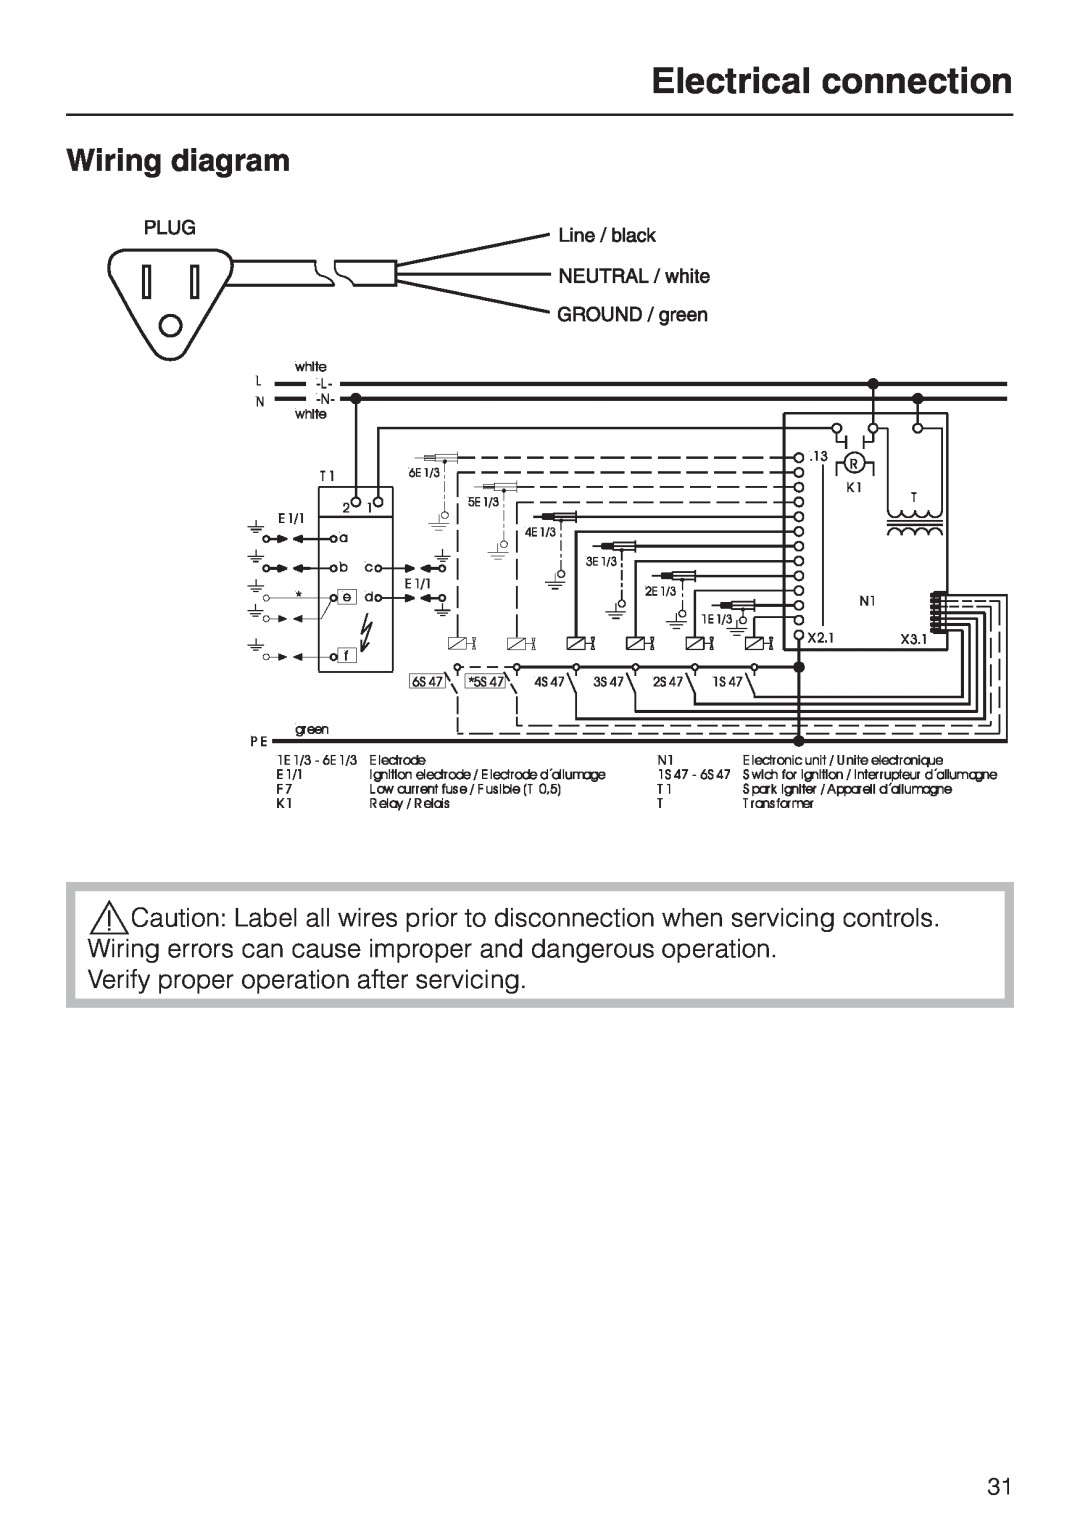 Miele KM 3465, KM 3475, KM 3464 Wiring diagram, Electrical connection, Verify proper operation after servicing 